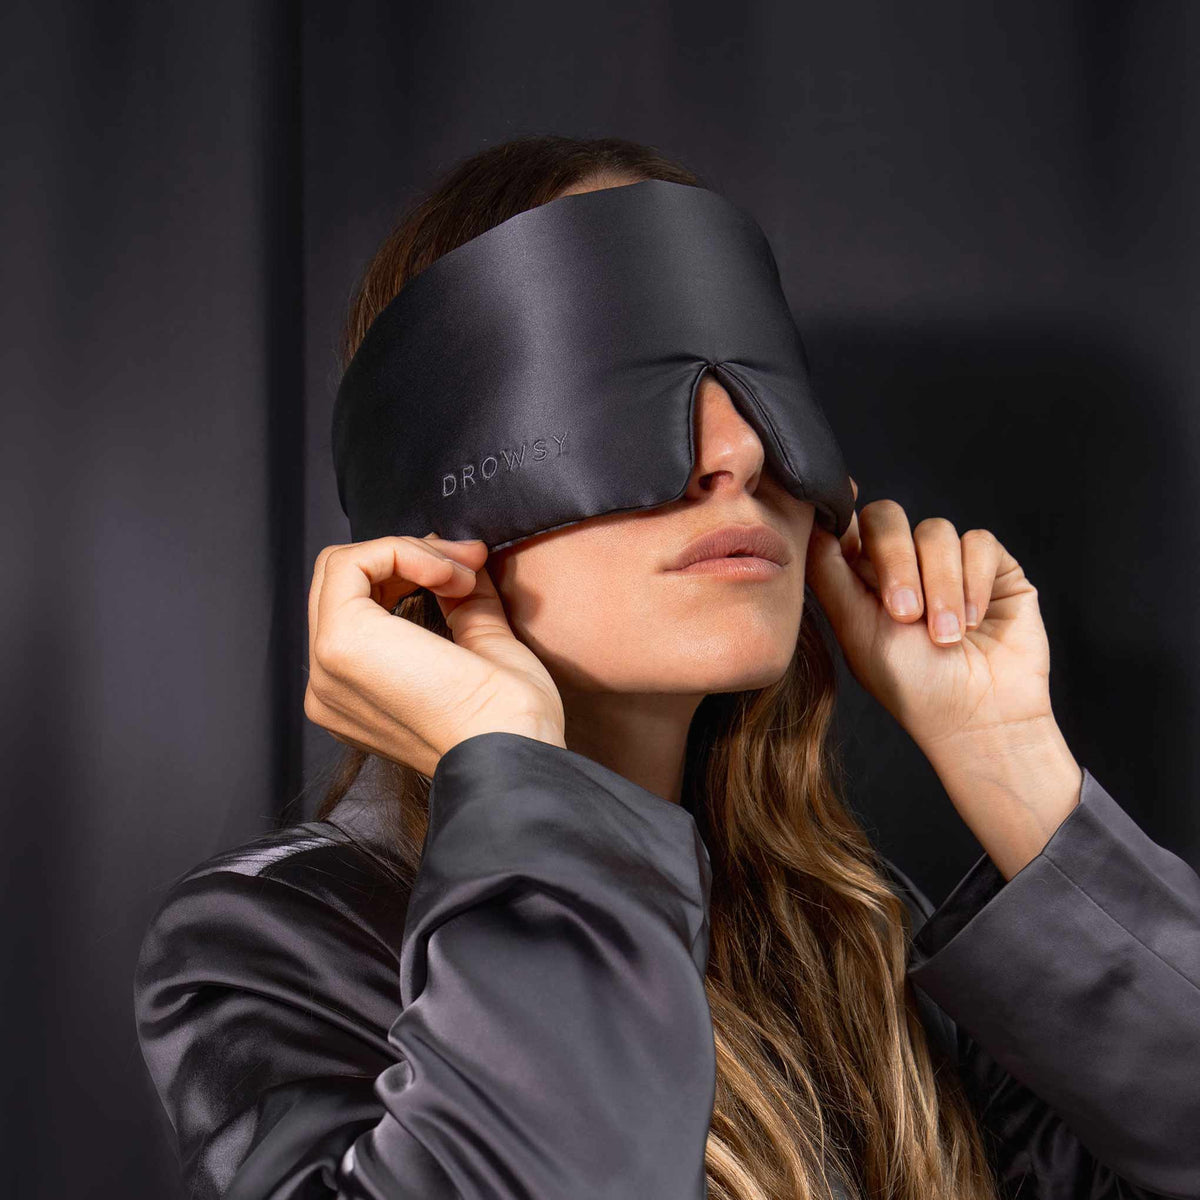 Model with Drowsy Silk sleep mask covering eyes